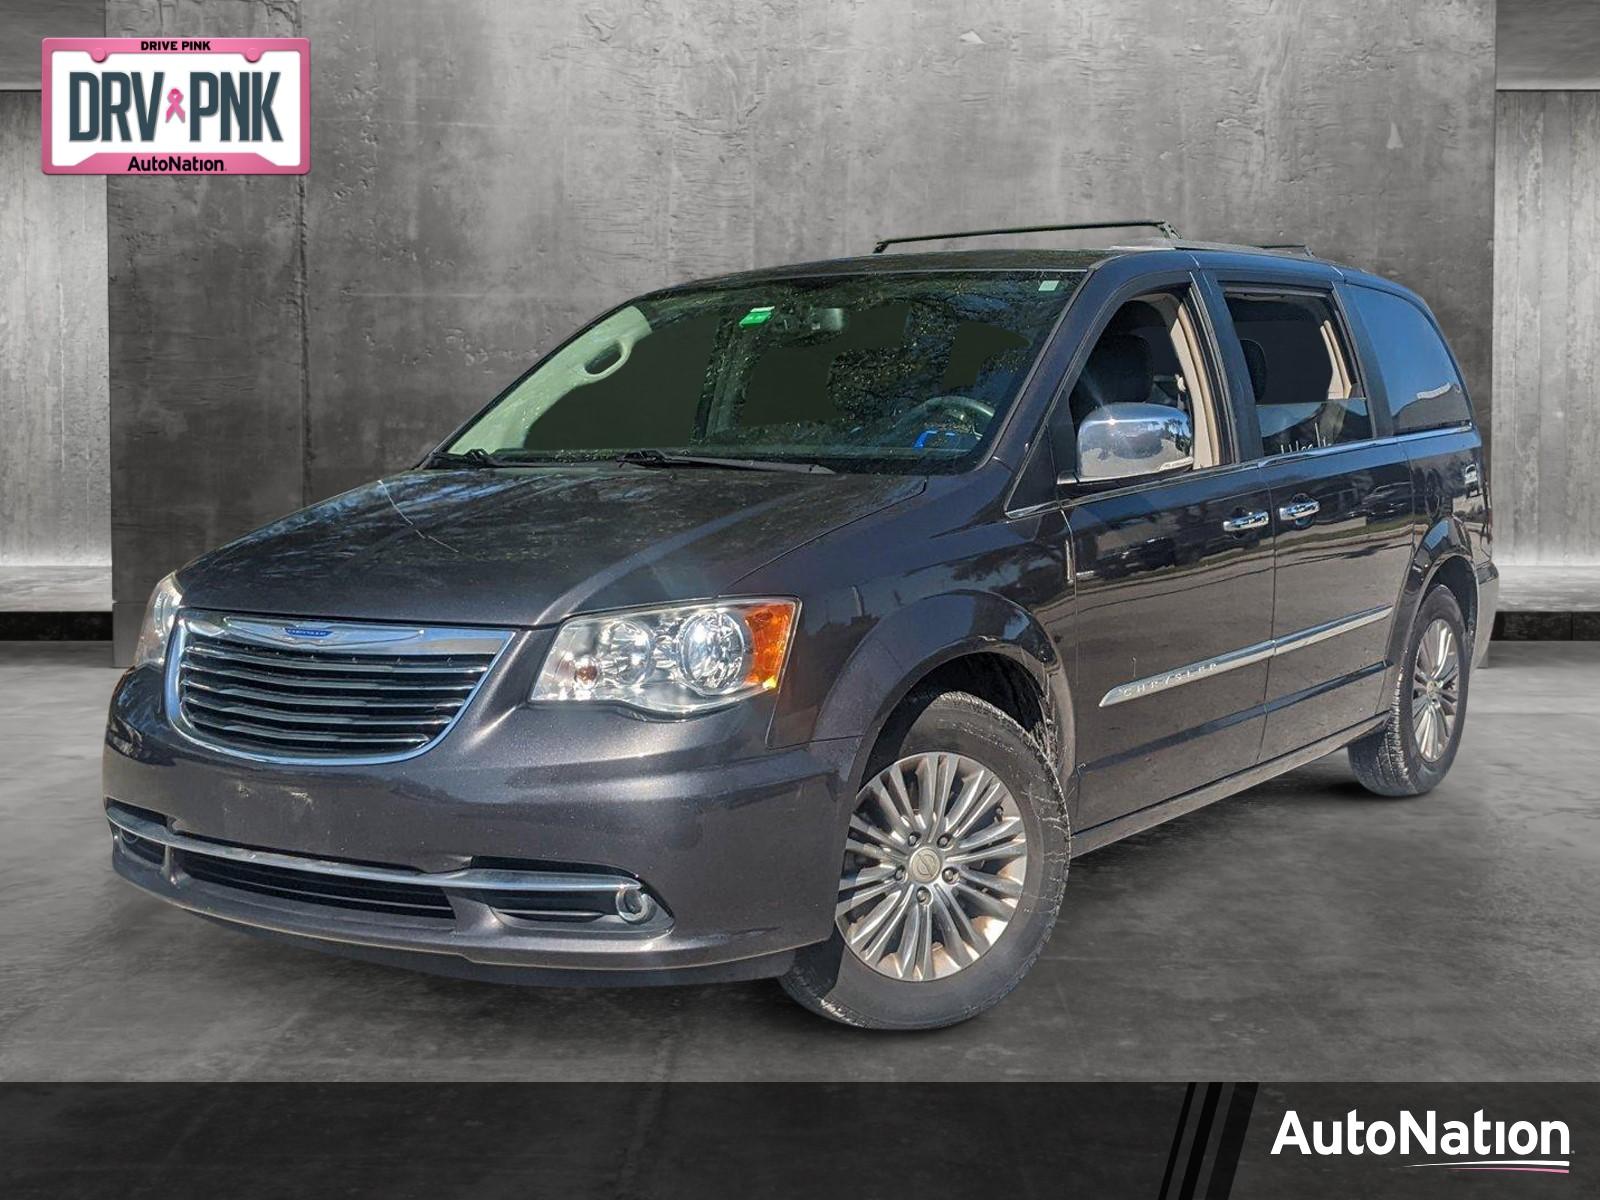 2015 Chrysler Town & Country Vehicle Photo in Corpus Christi, TX 78415